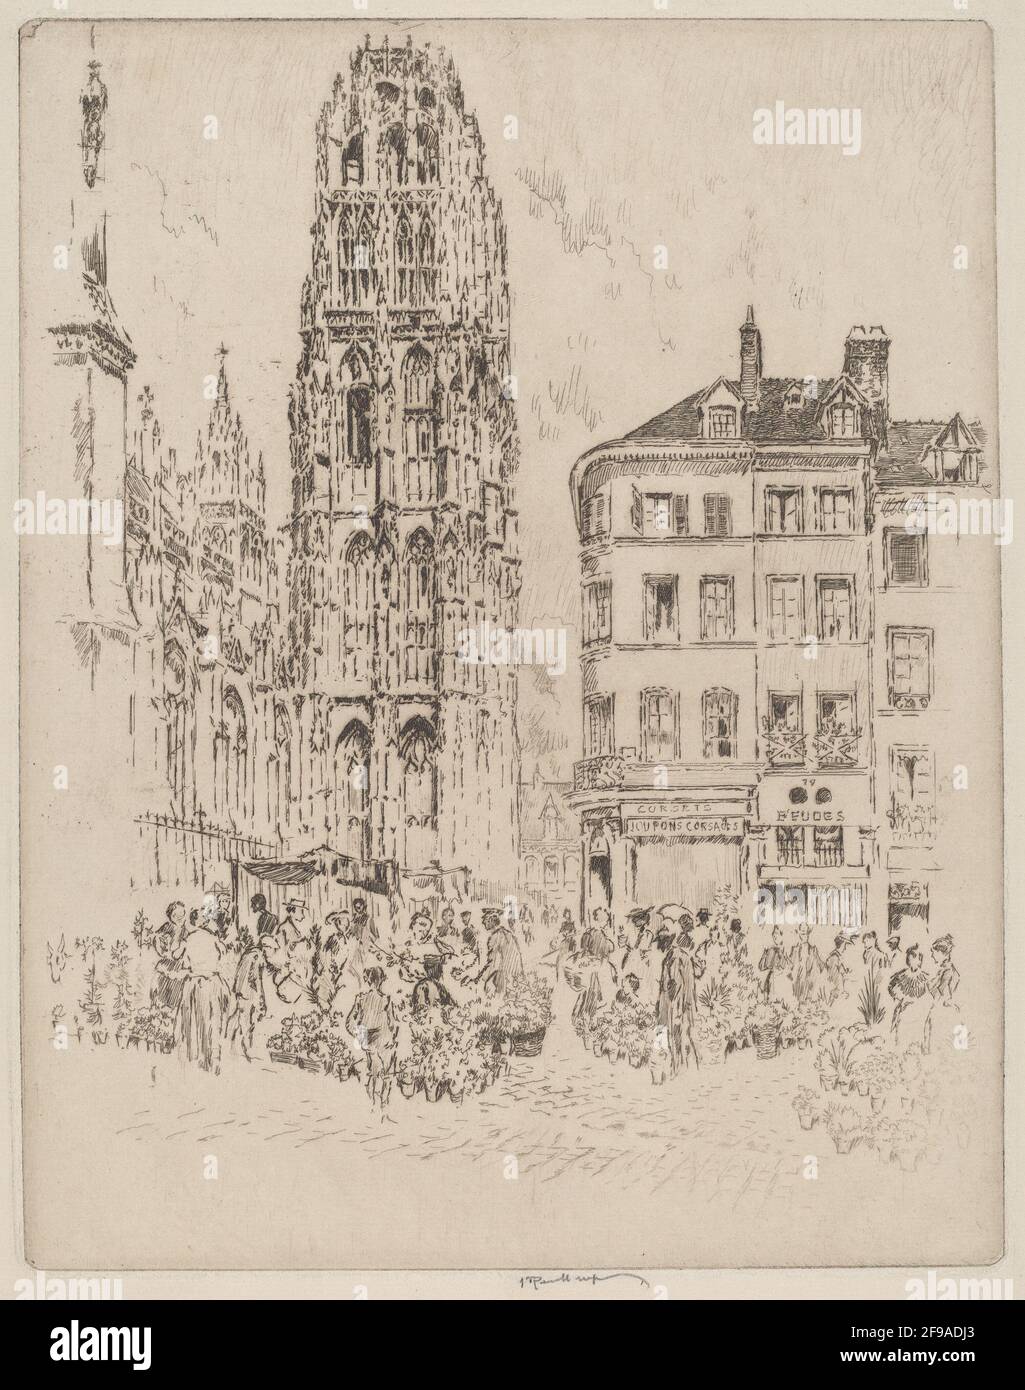 Flower Market and Butter Tower, Rouen, 1907. Stock Photo